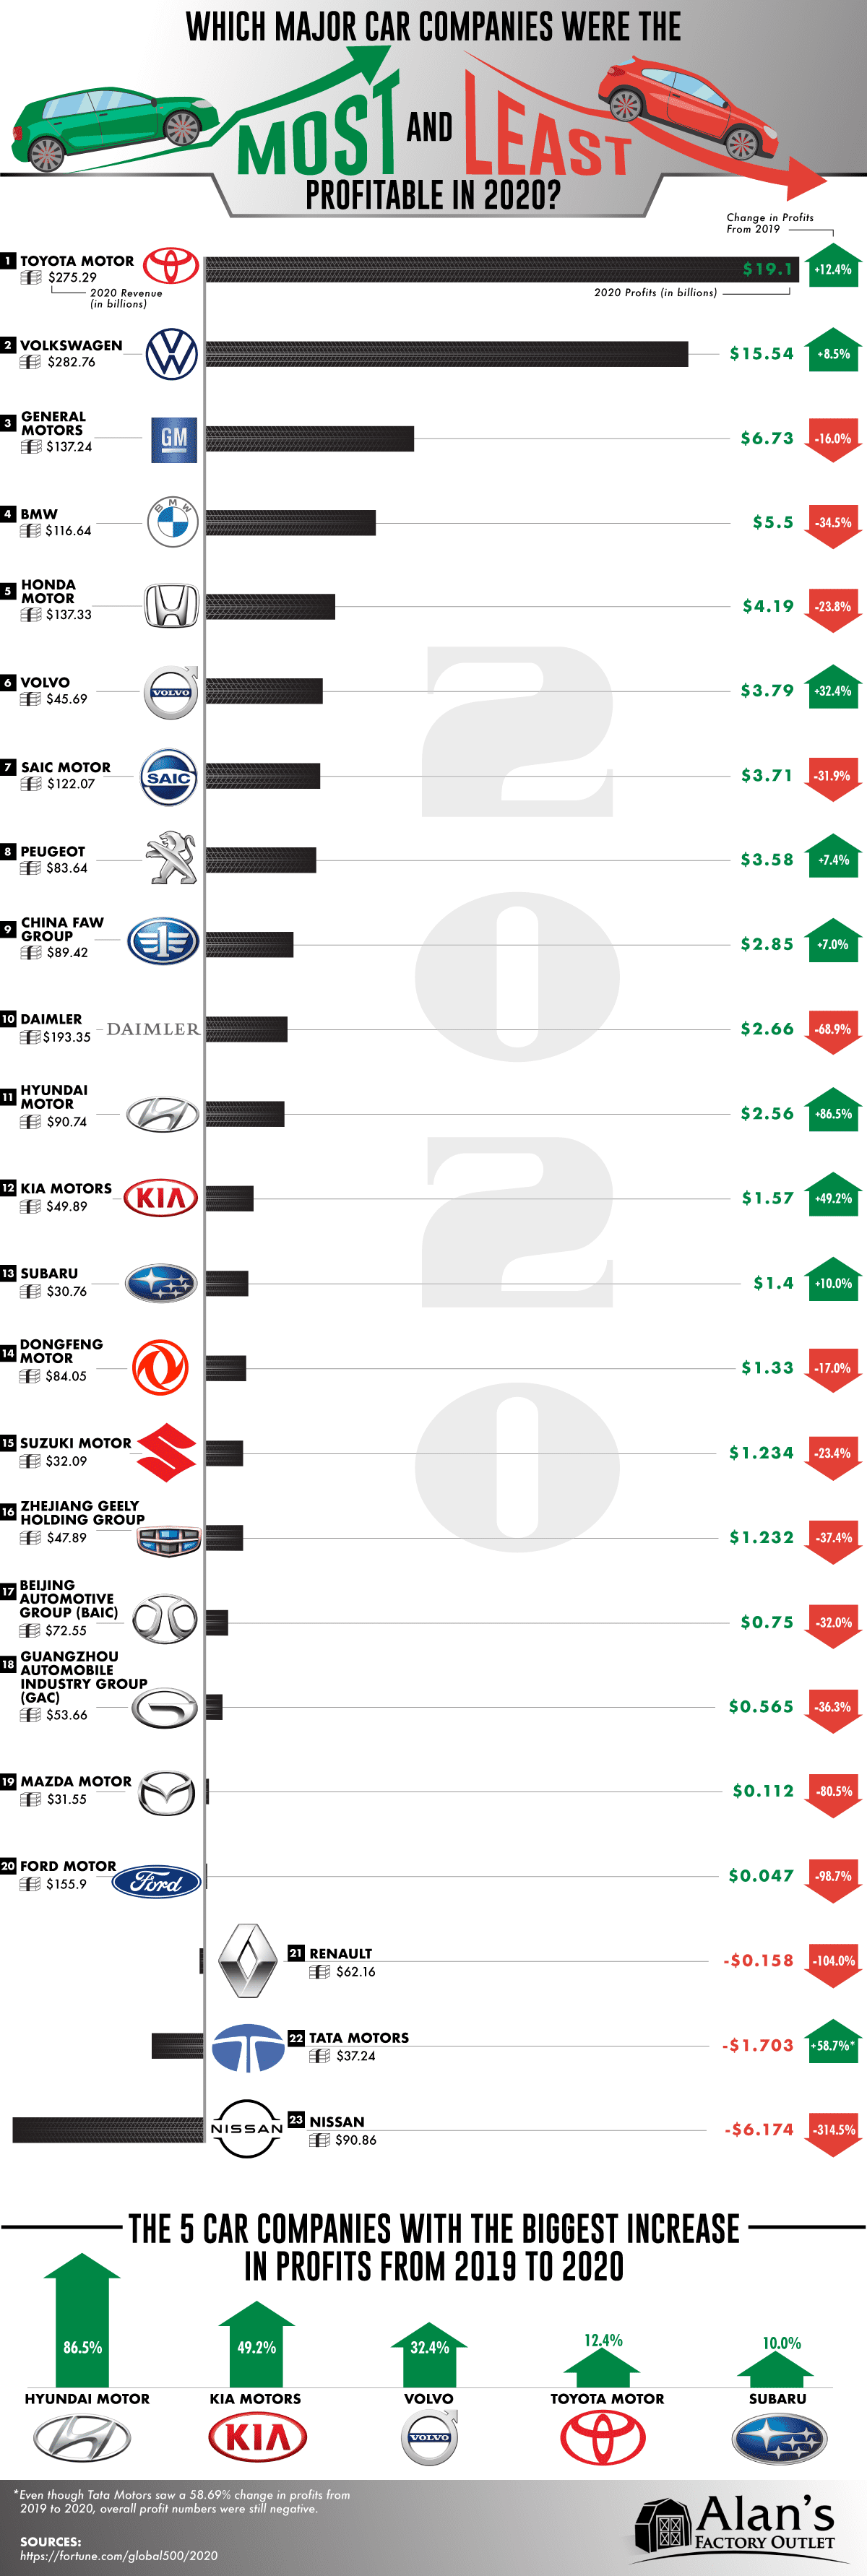 Which Major Car Companies Were the Most and Least Profitable in 2020